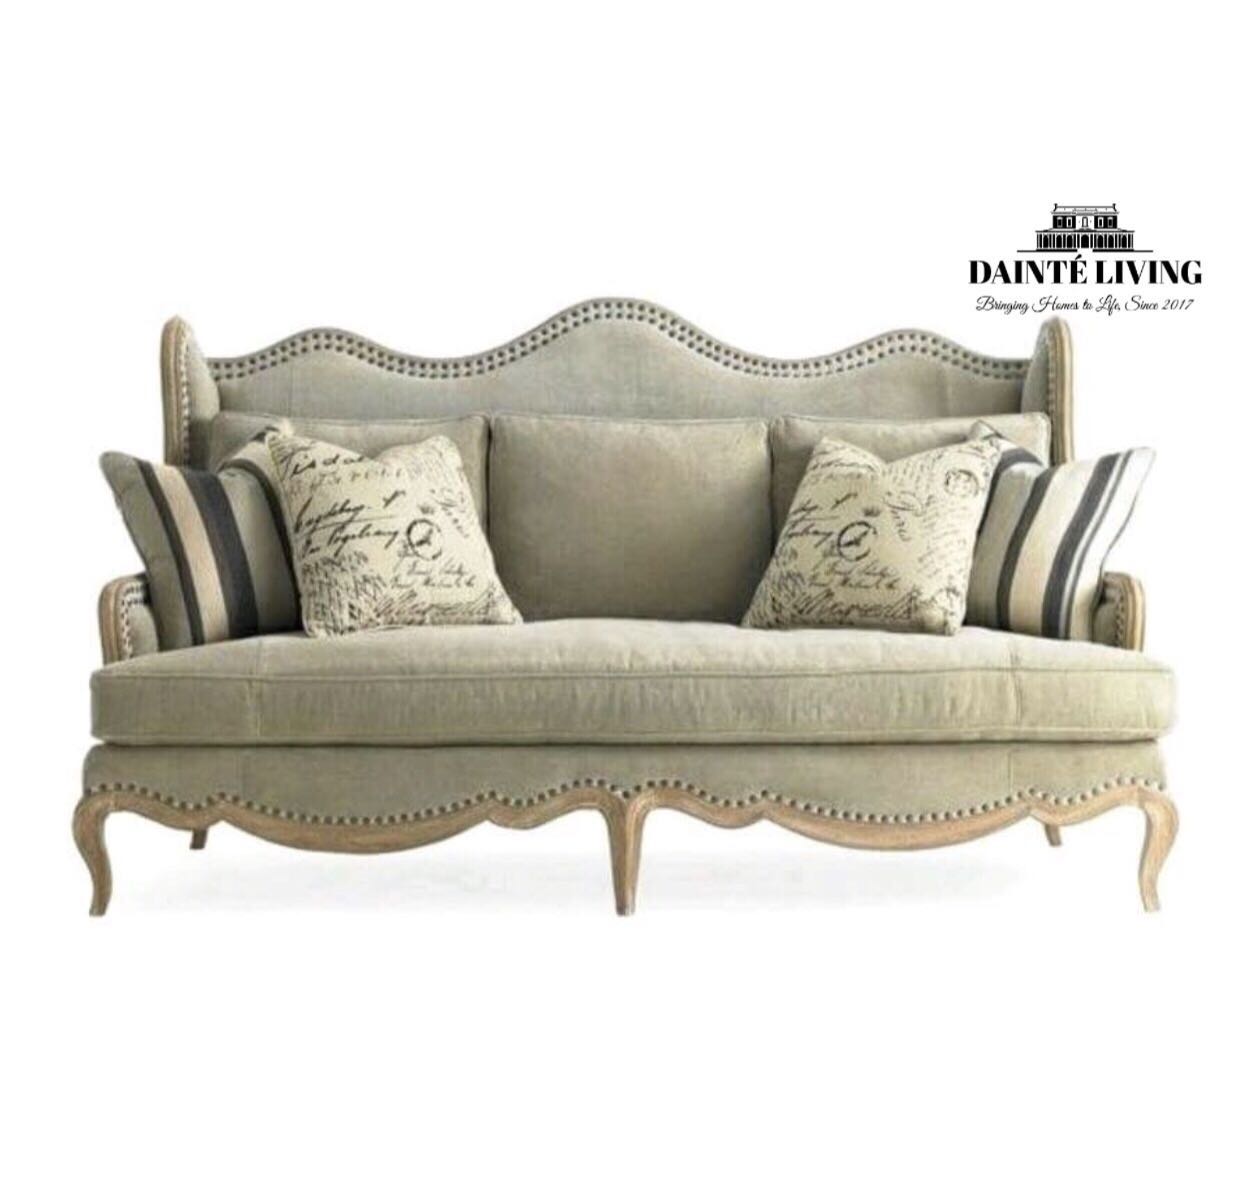 French Victorian Shabby Chic Sofa Furniture Sofas On Carousell